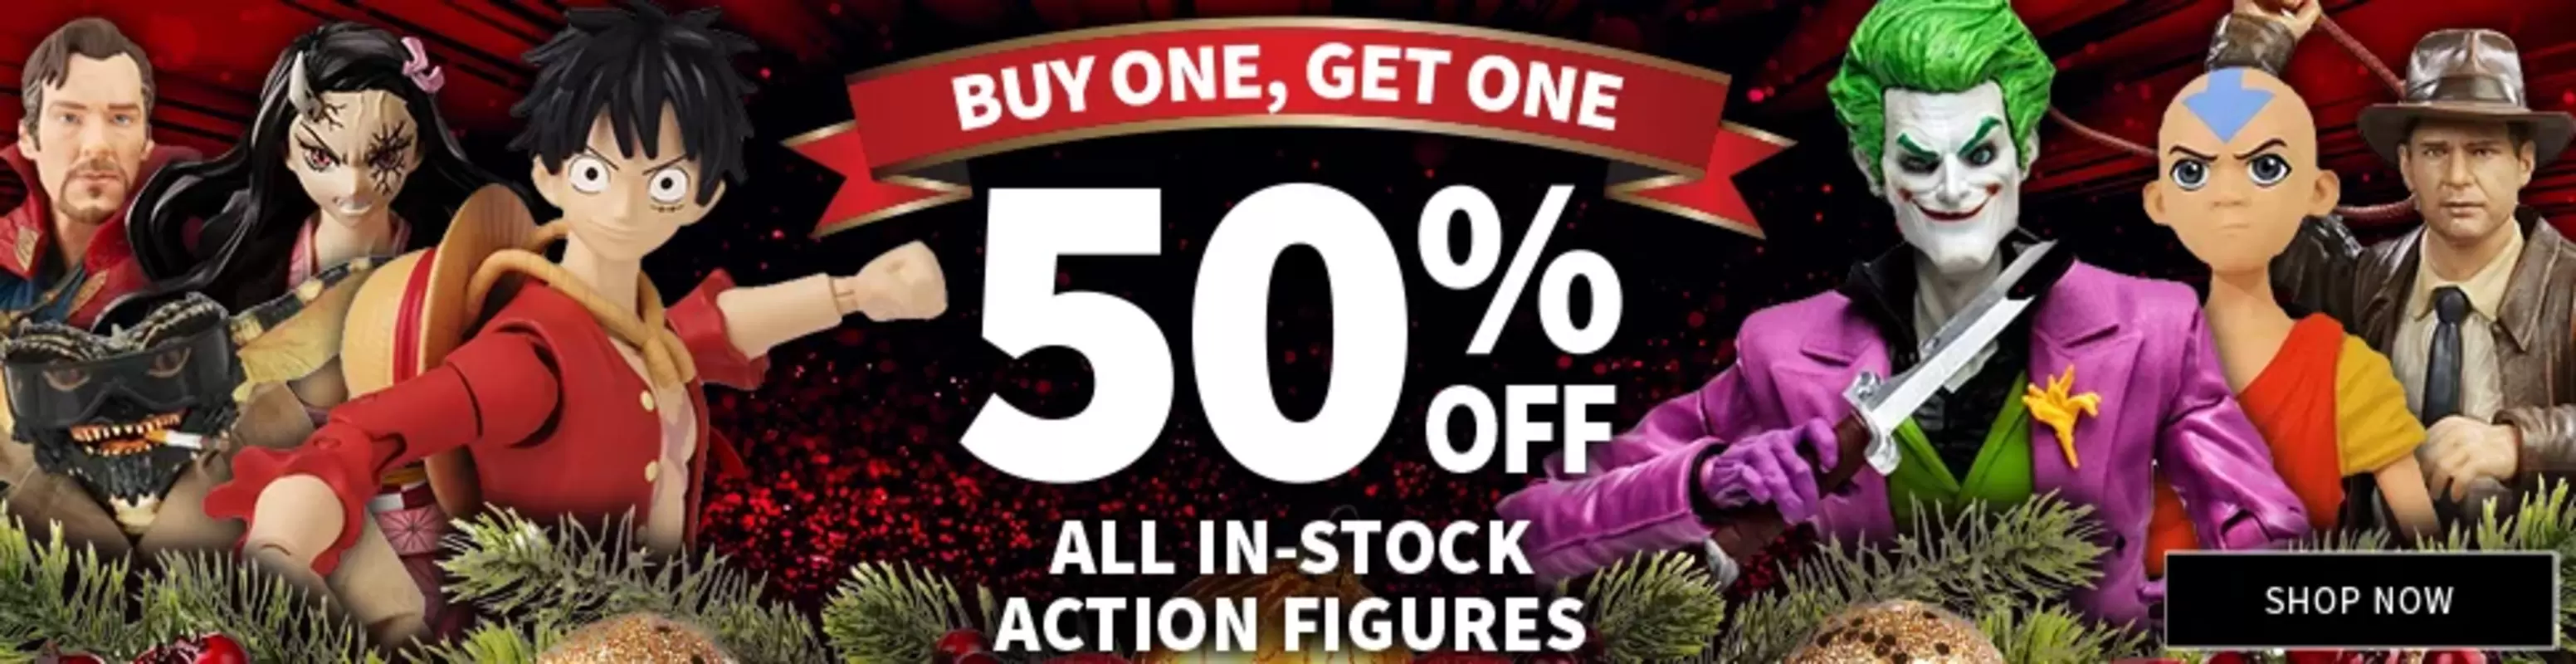 BOGO 50% Off on All In-Stock Action Figures at Entertainment Earth!